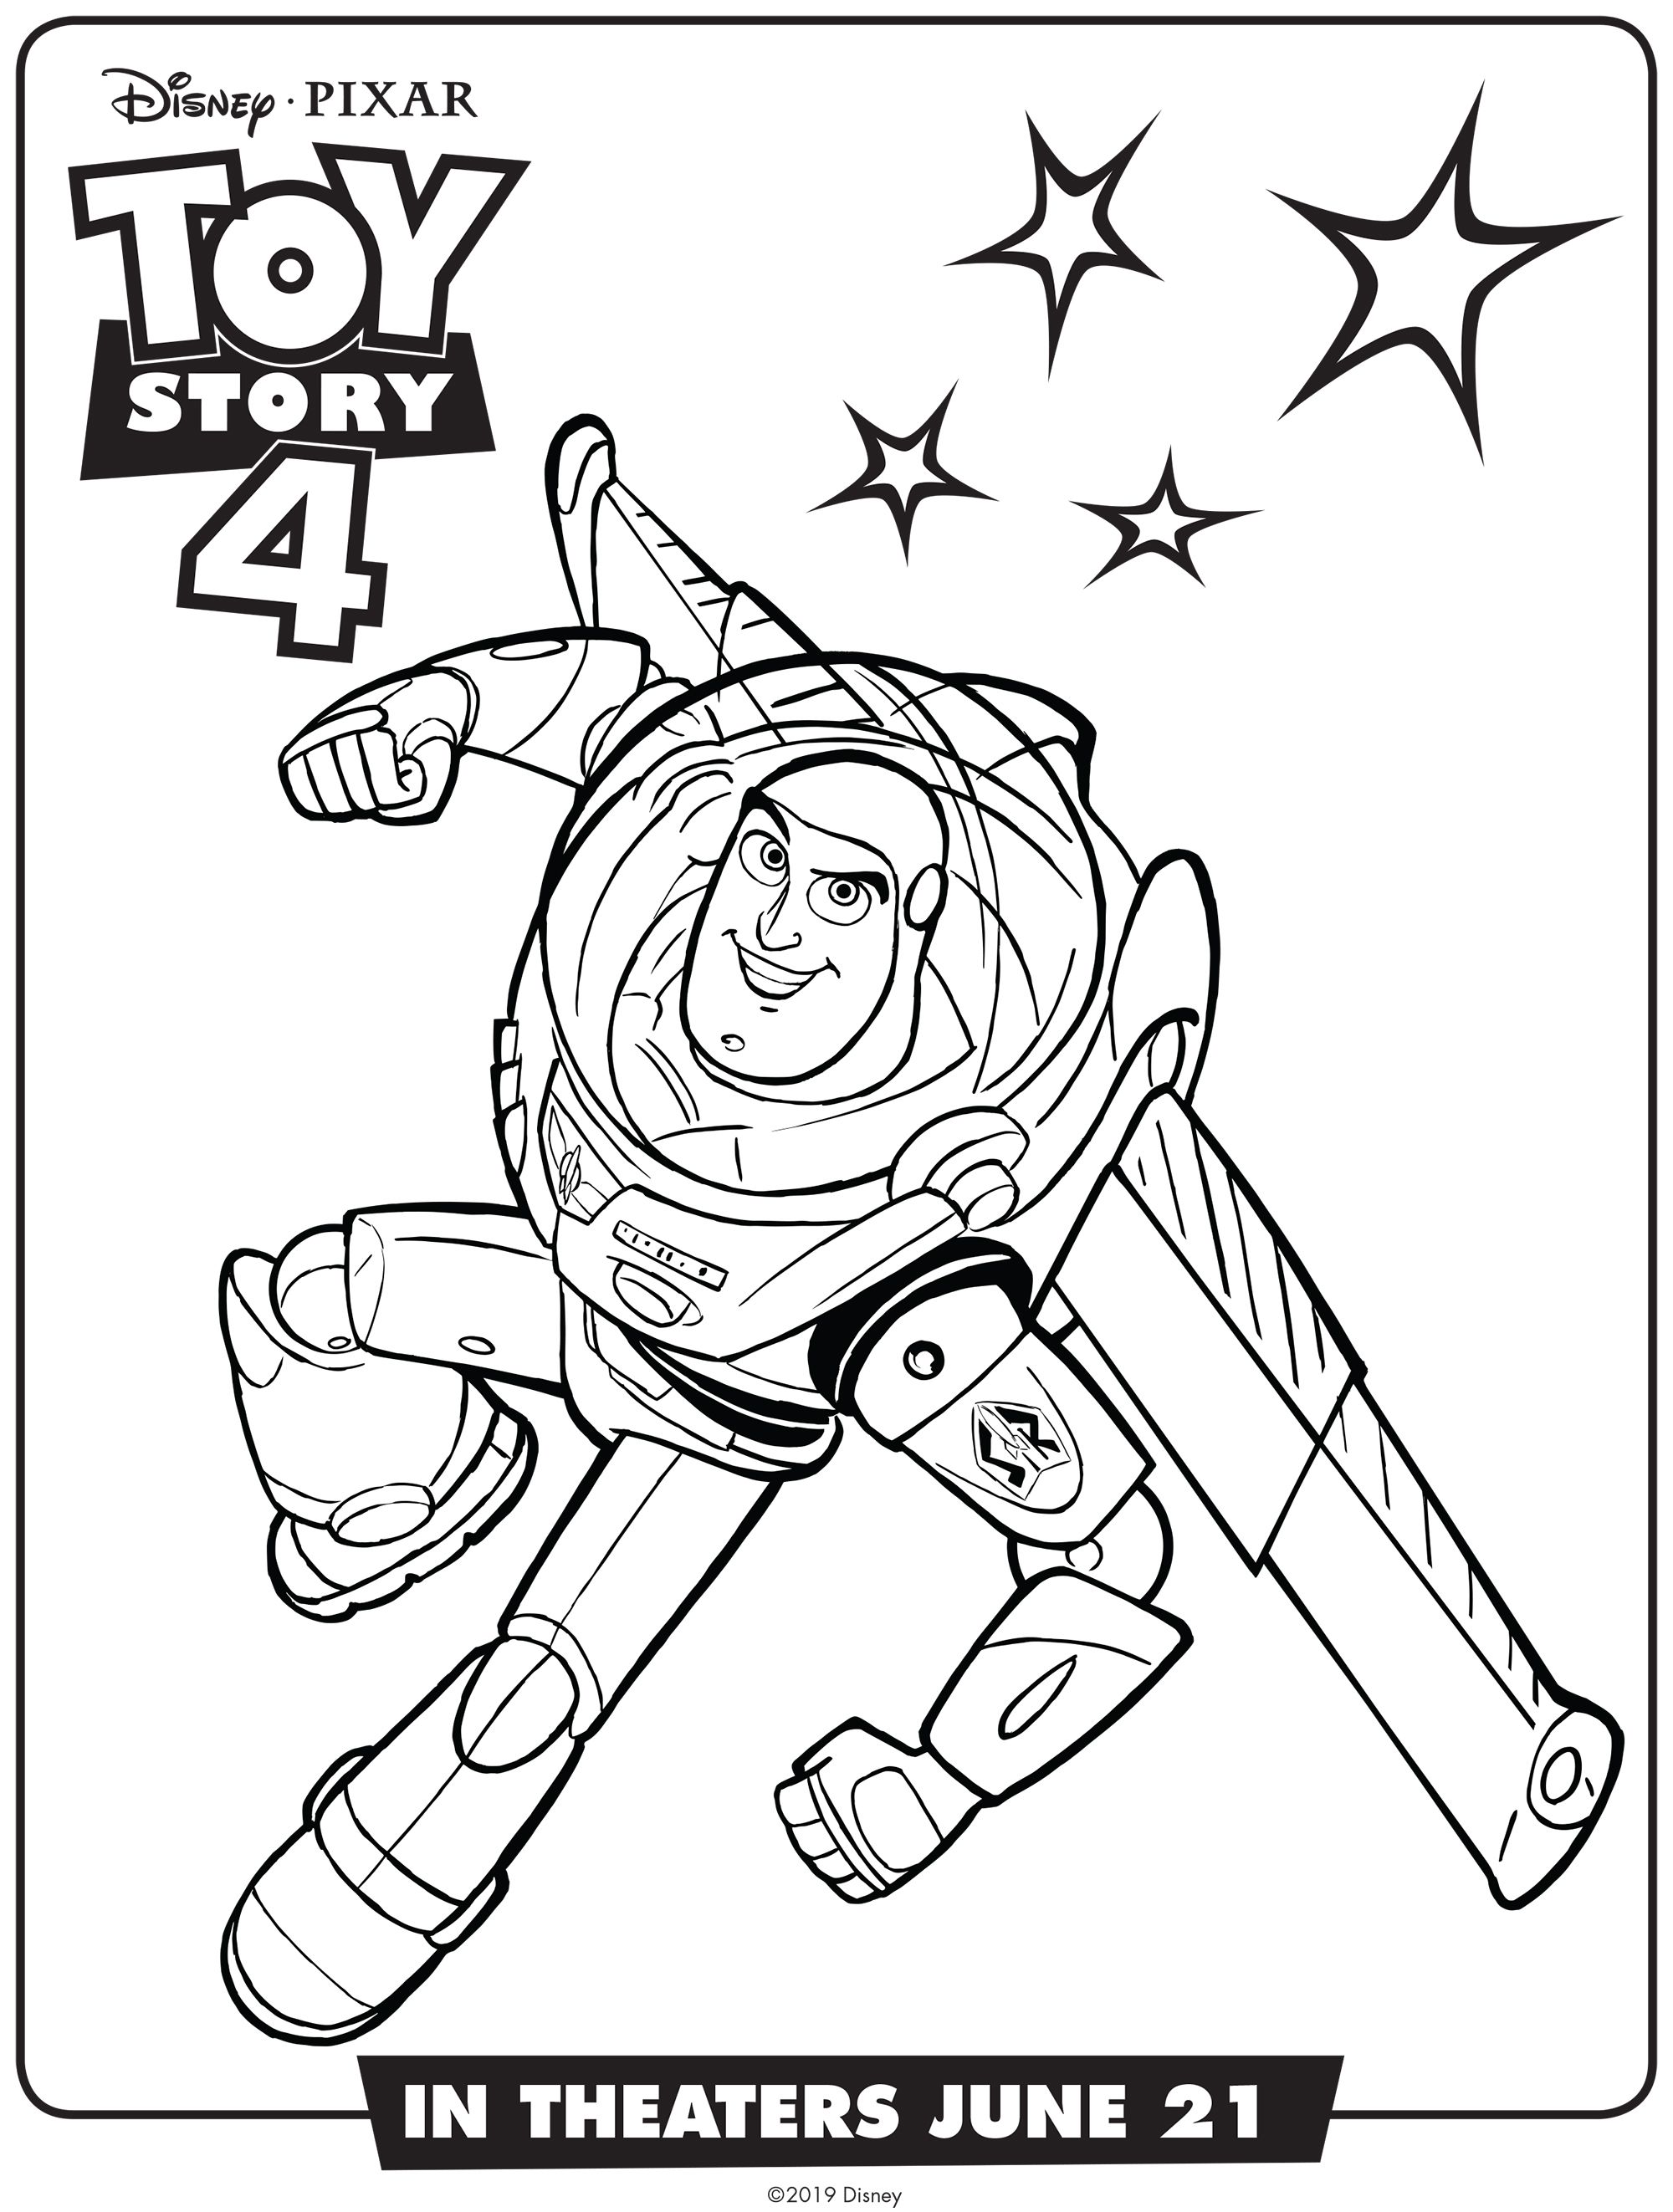 Toy Story 4 Buzz Lightyear Coloring Sheet #Disney | Toy ...